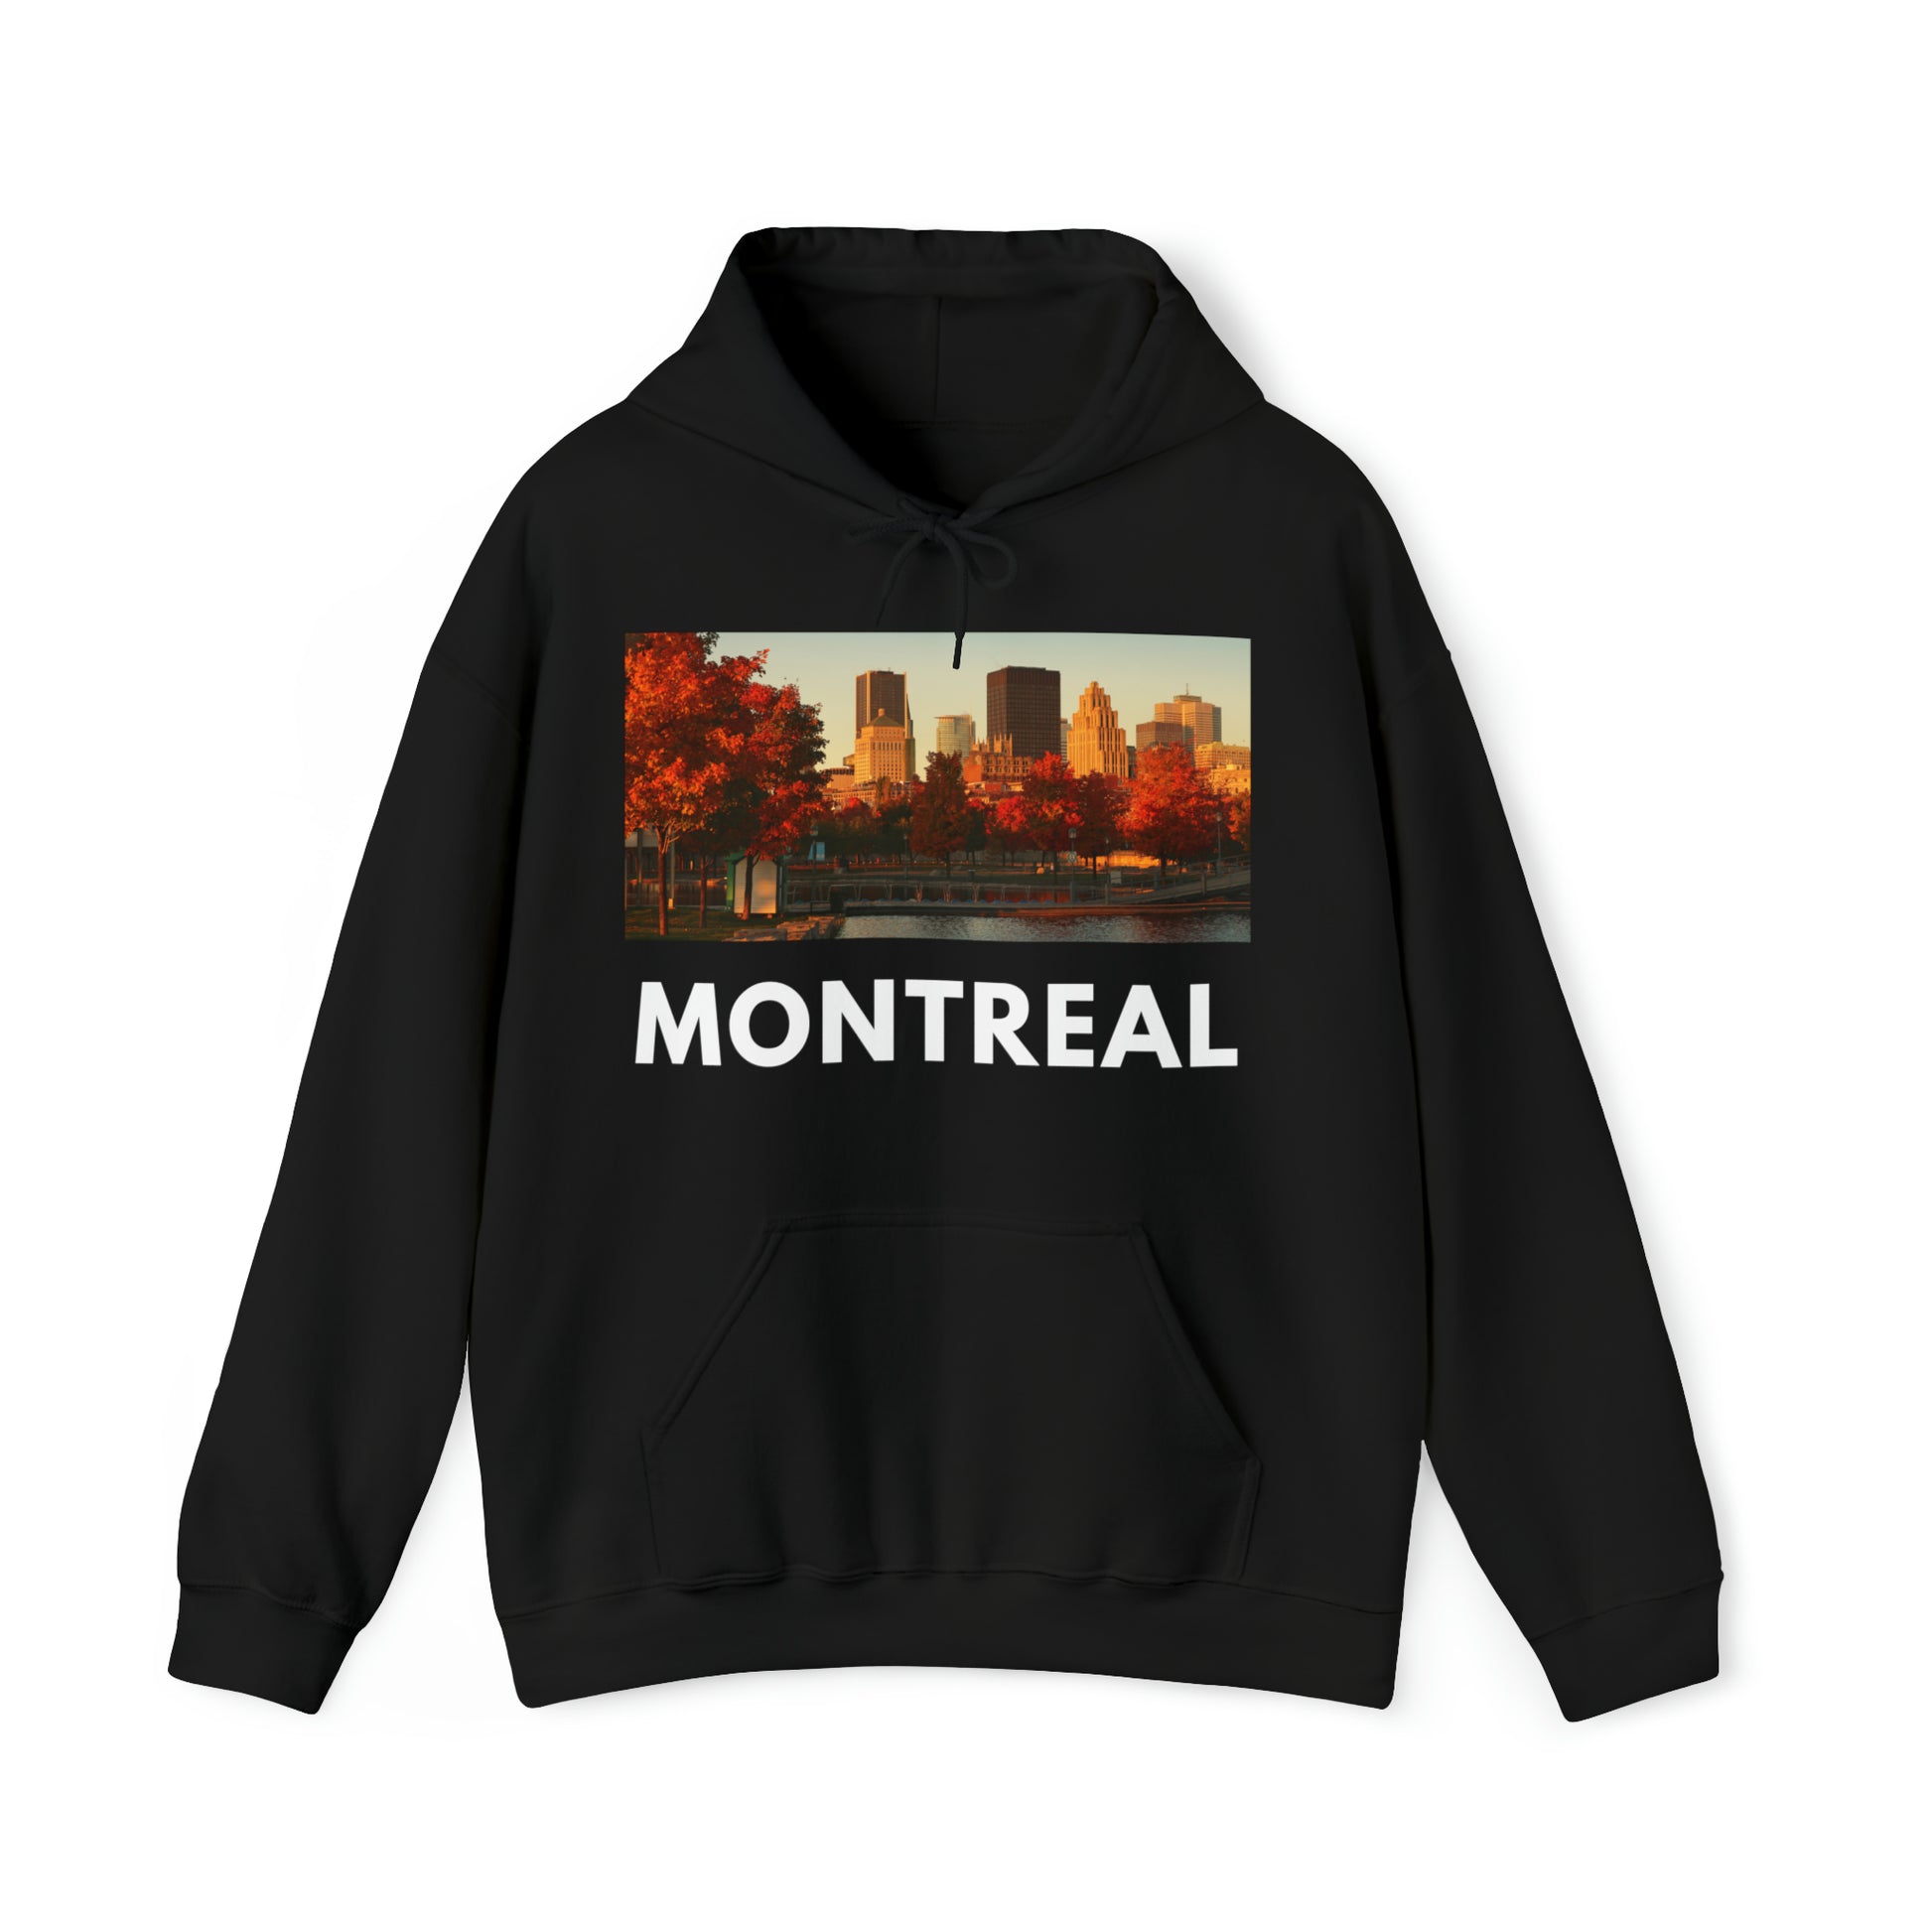 S Black Montreal Hoodie: The Fall from HoodySZN.com